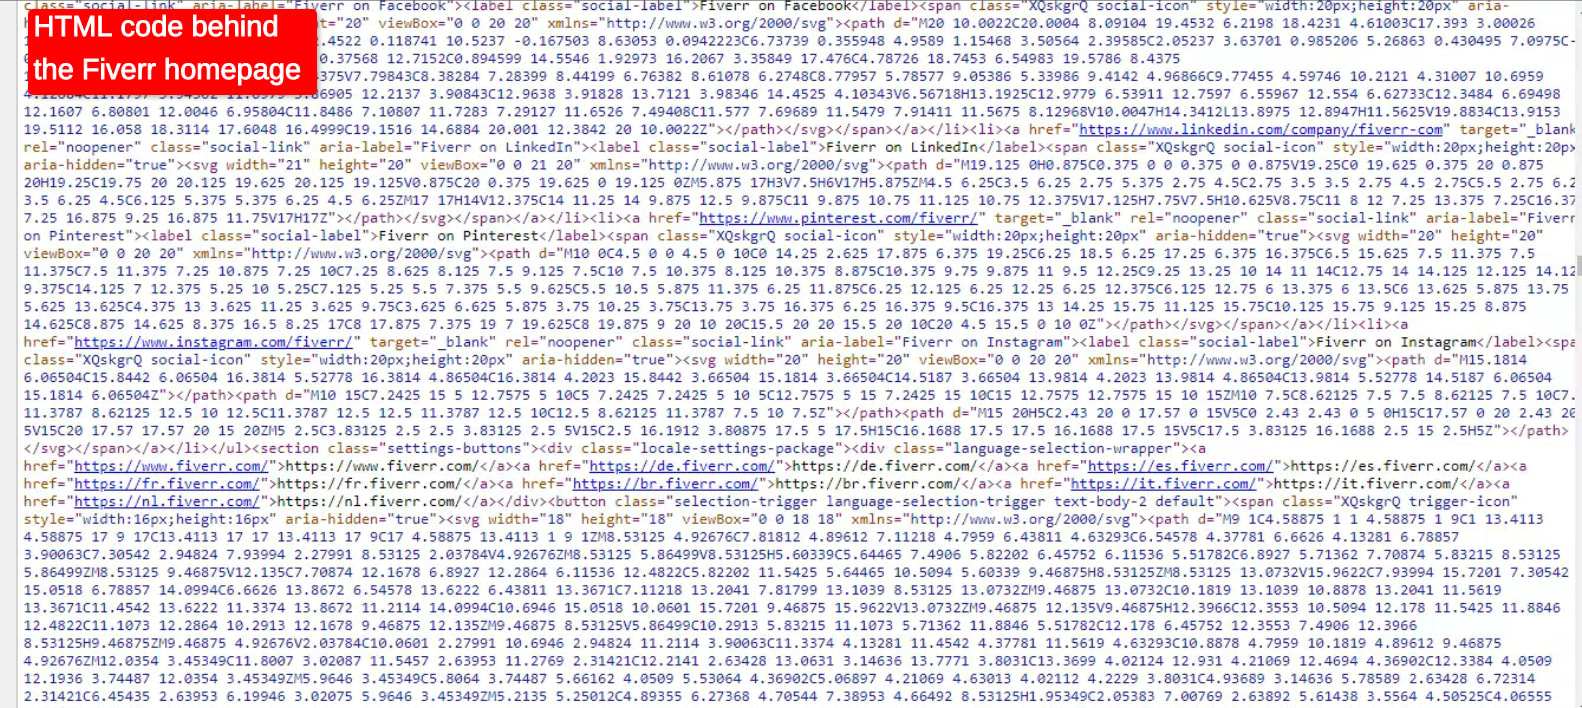 The HTML code behind the Fiverr homepage 